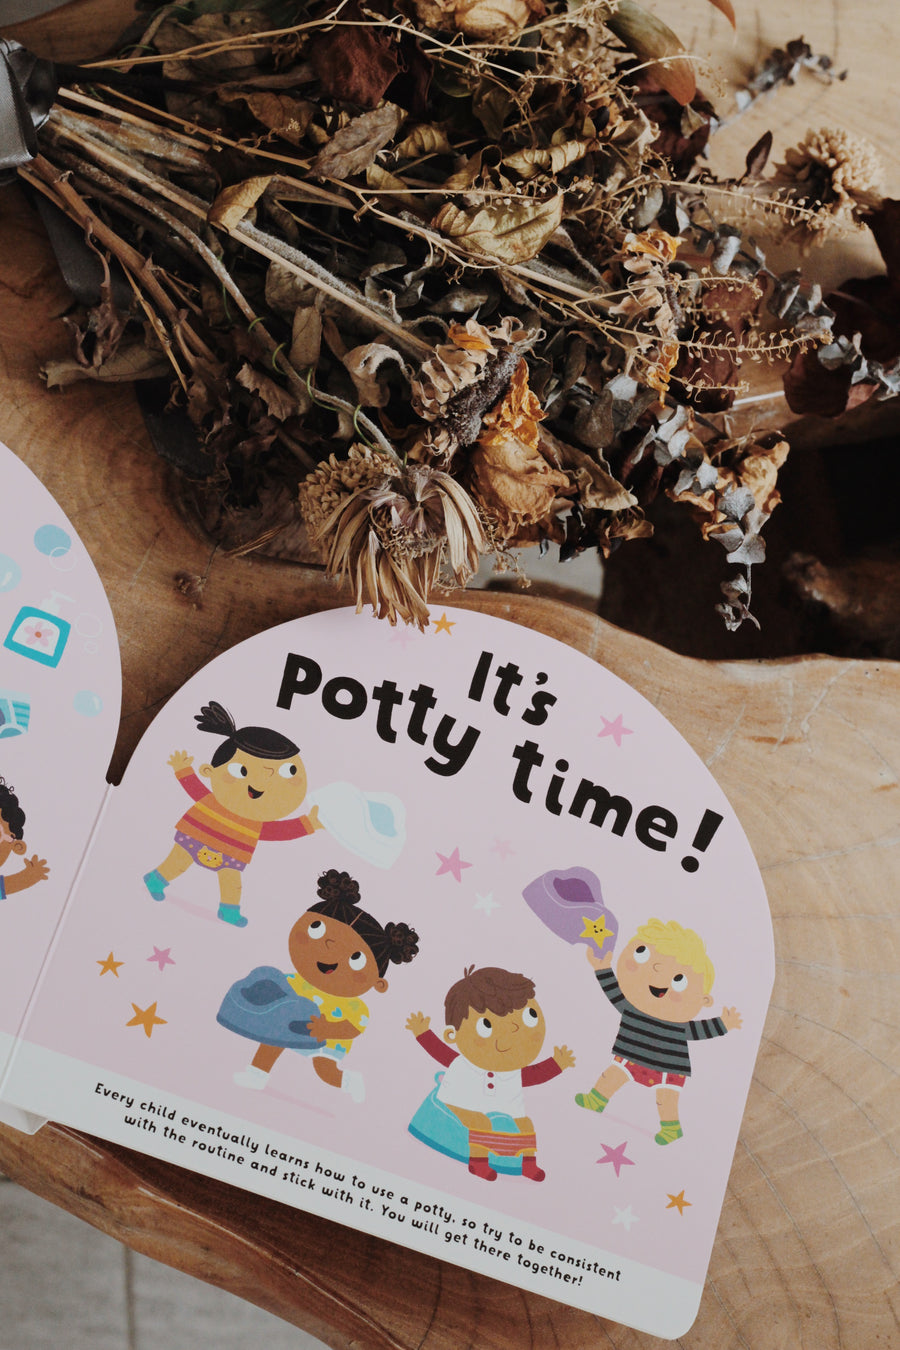 It's Potty Time! : Say "goodbye" to nappies with this potty-training book